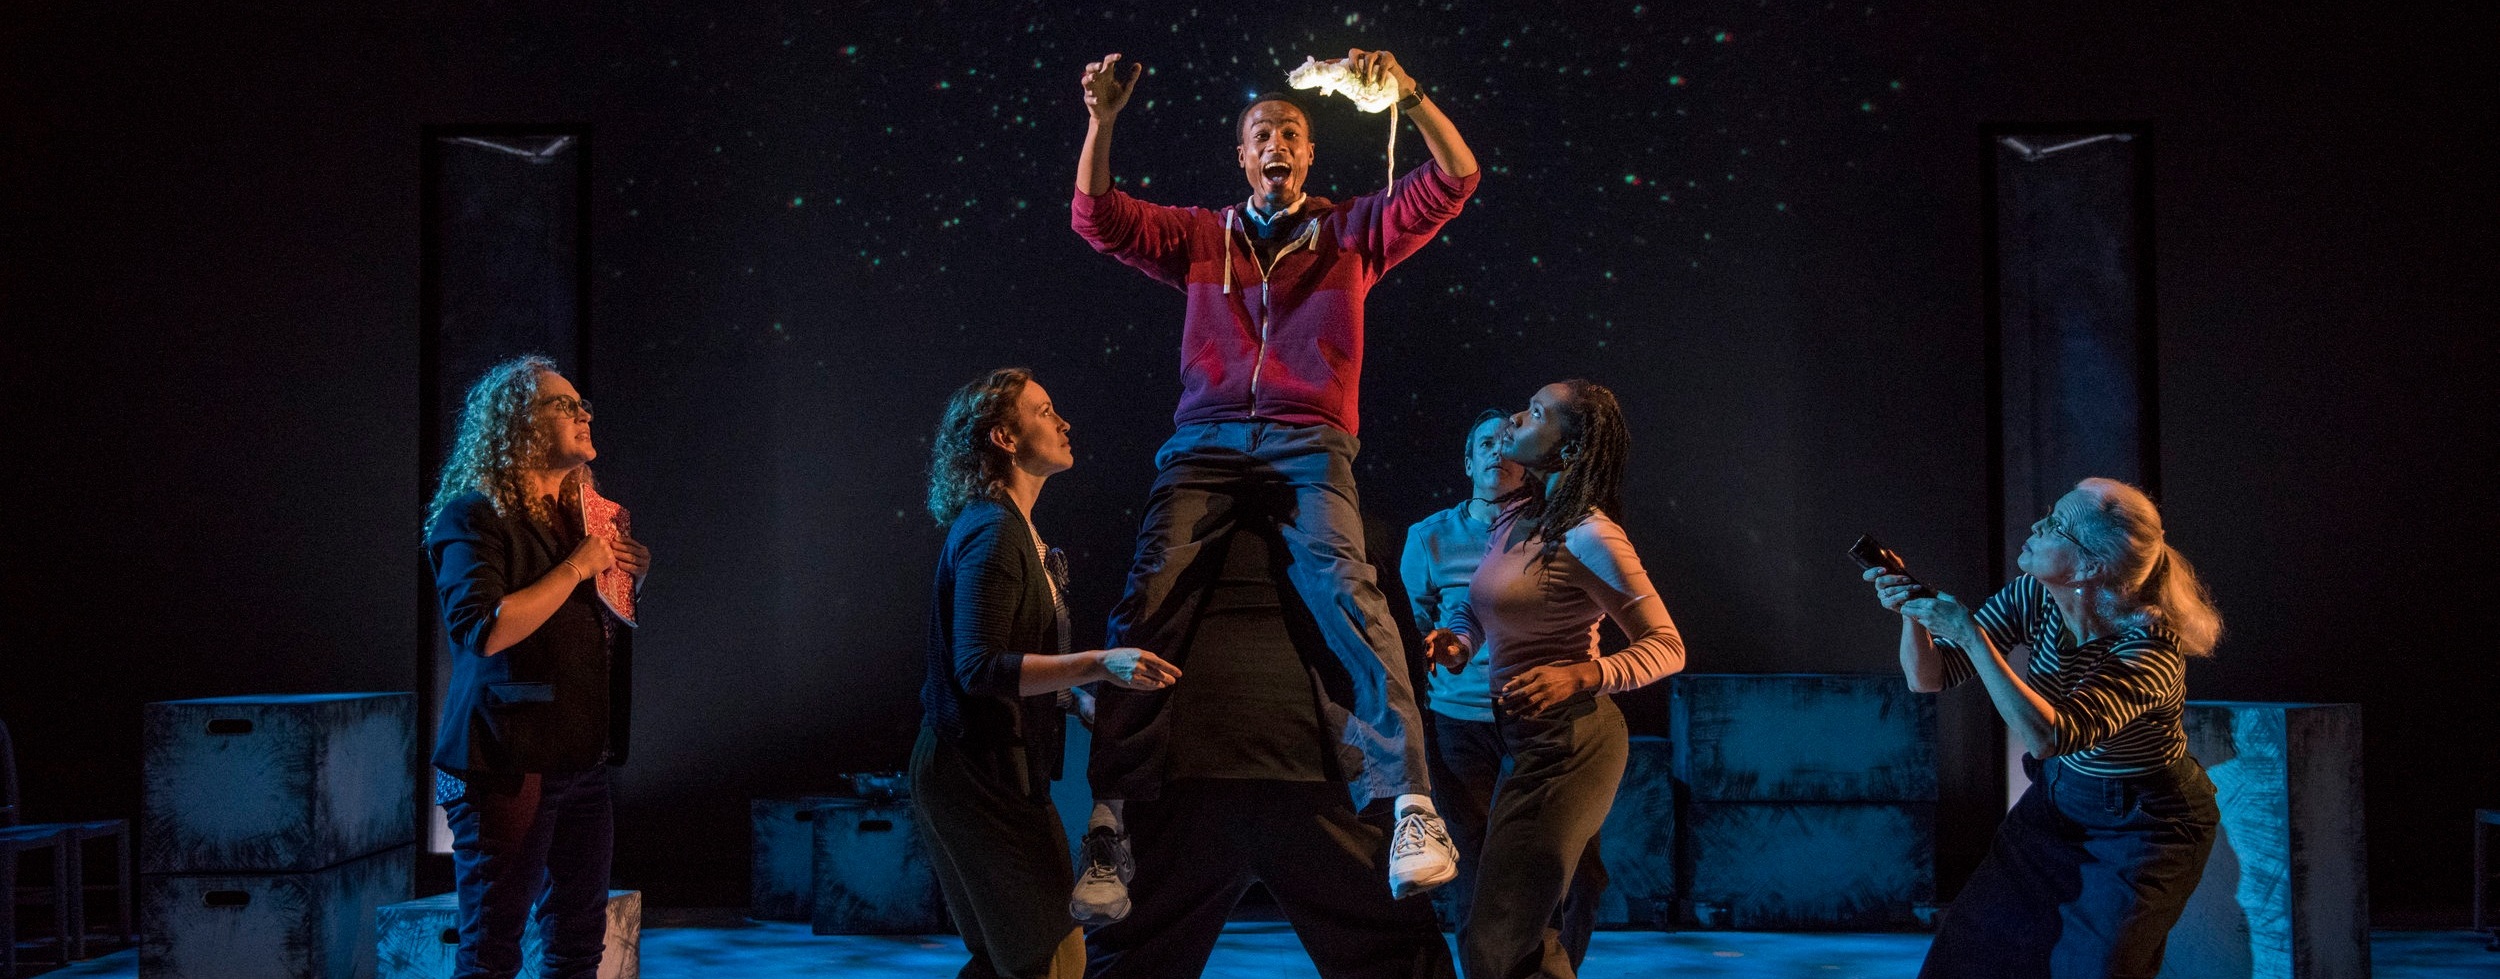   Caroline Neff ,  Rebecca Spence ,  Terry Bell ,  Eunice Woods,  and  Meg Thalken  in Steppenwolf for Young Adults’ production of  The Curious Incident of the Dog in the Night-Time,  Directed by  Jonathan Berry , Movement Creation by  Dan Plehal . P